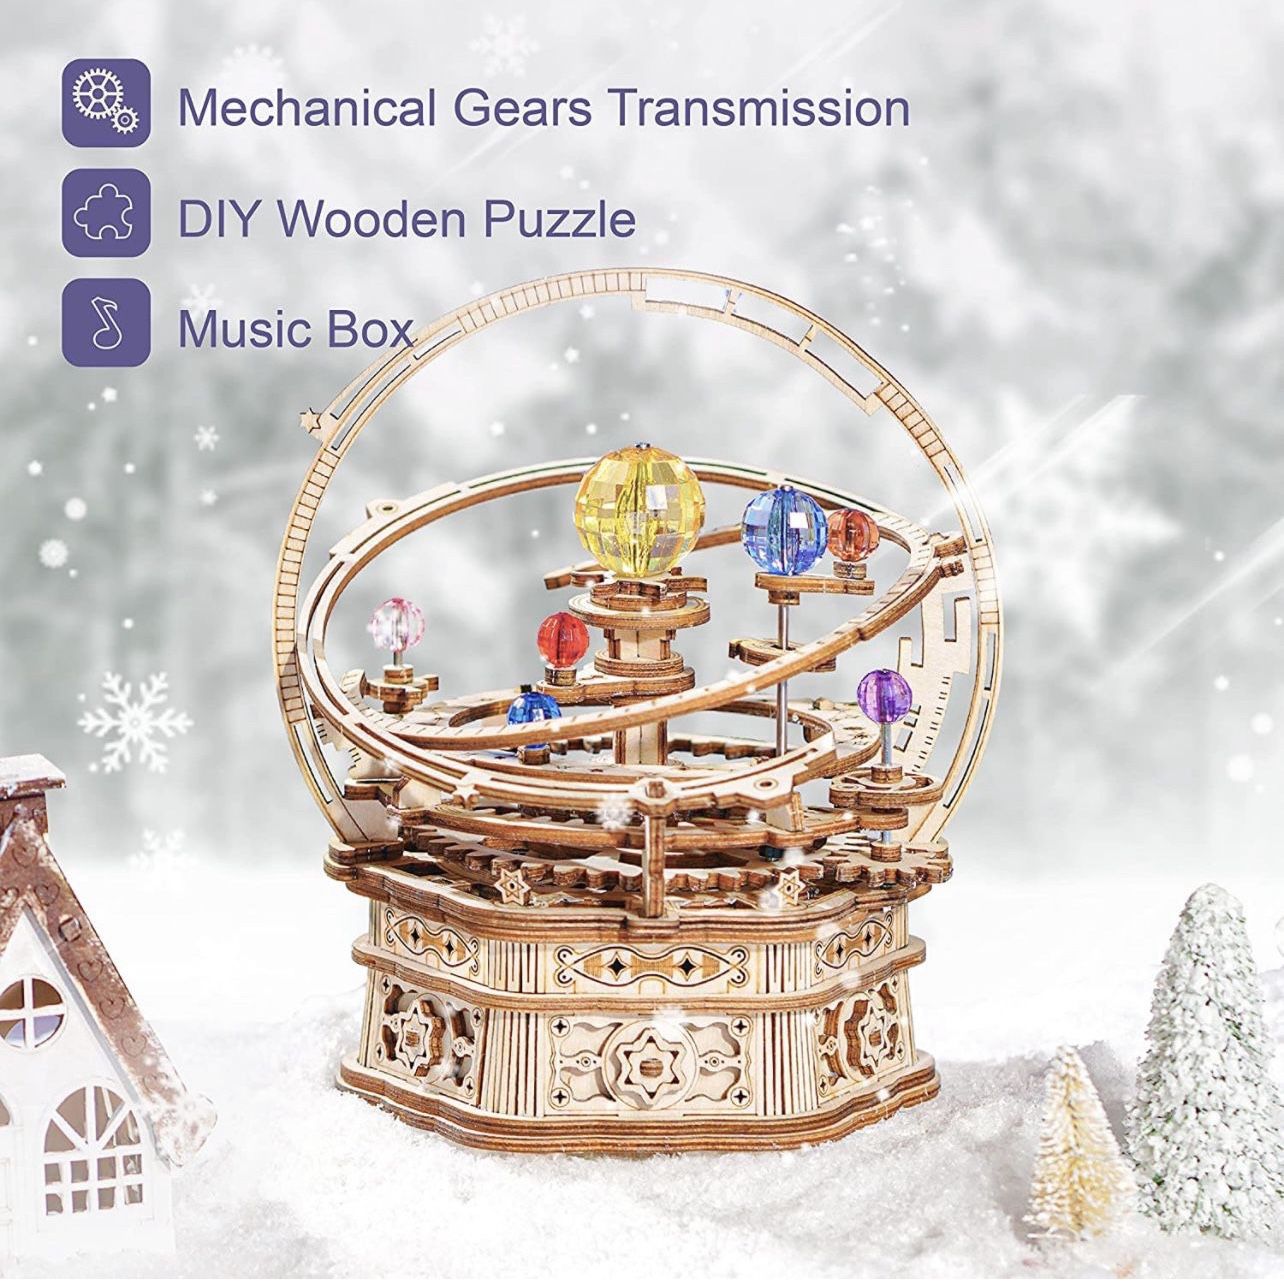 RoWood Music Box 3D Puzzles for Adults, DIY Wooden Mechanical Building Model Kits, Gift for Teens Kids on Children's Day/Birthday/C